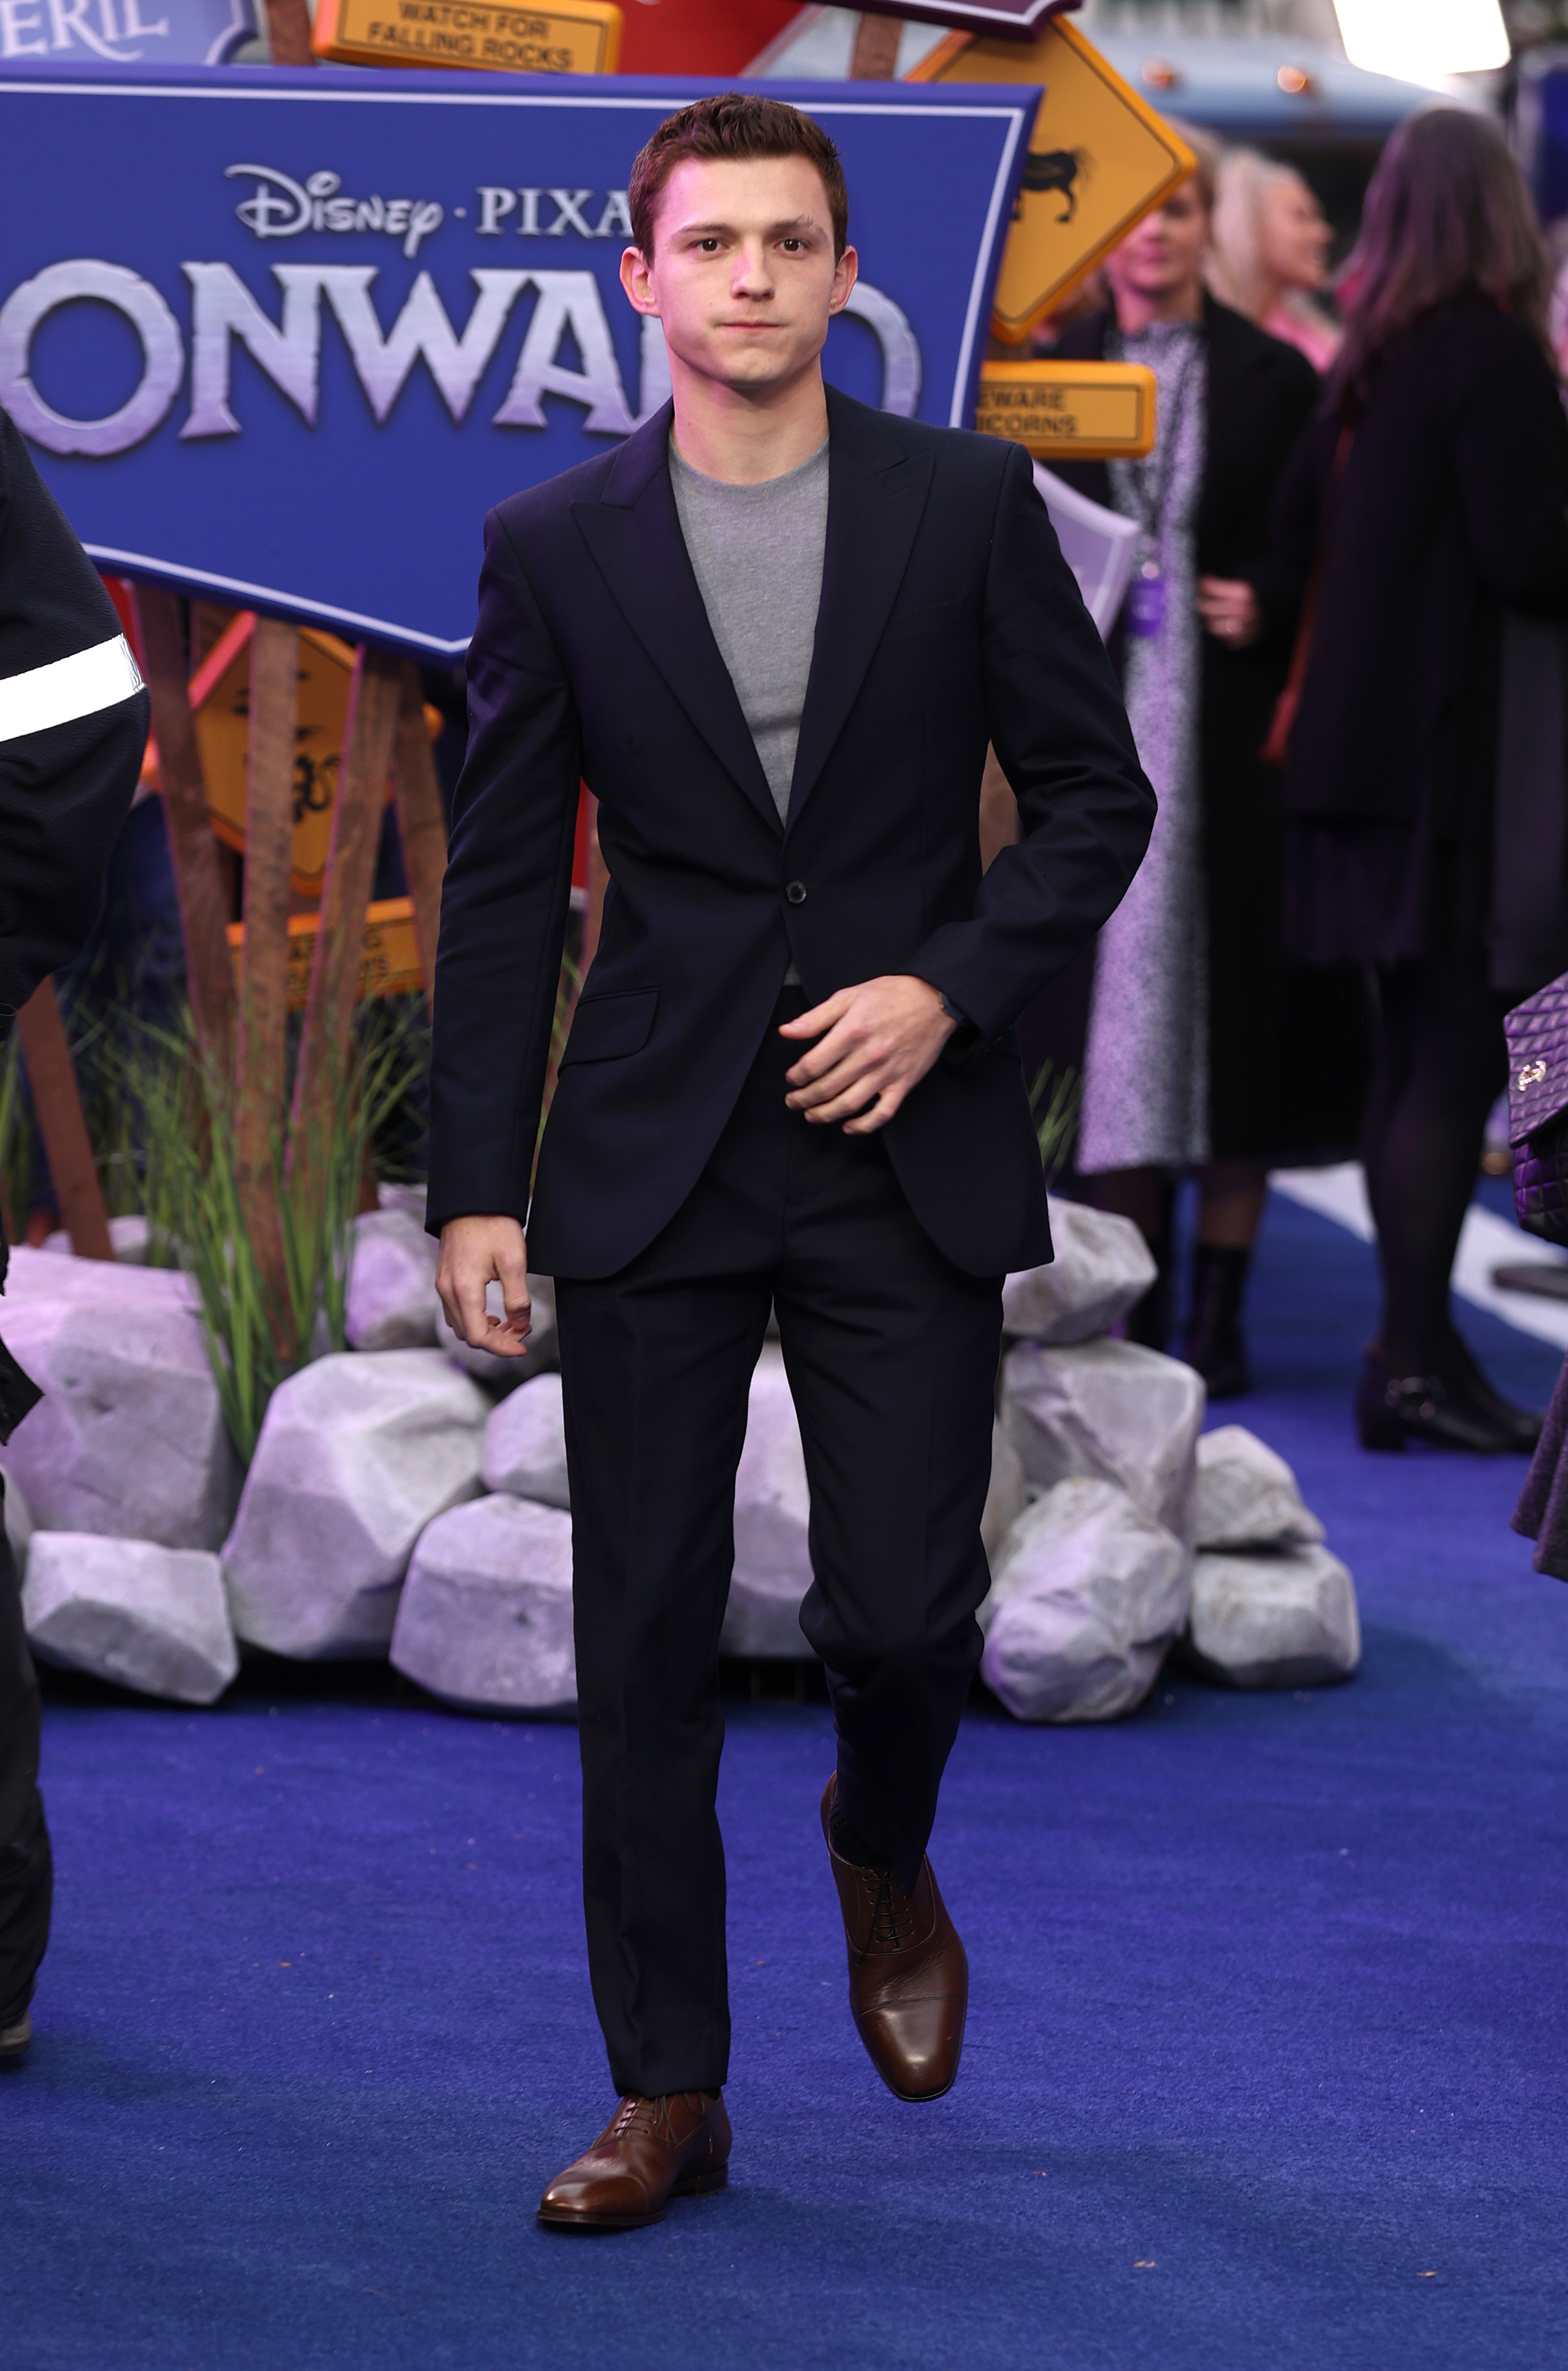 Tom Holland attends the "Onward" UK premiere on February 23, 2020 in London, England | Source: Getty Images